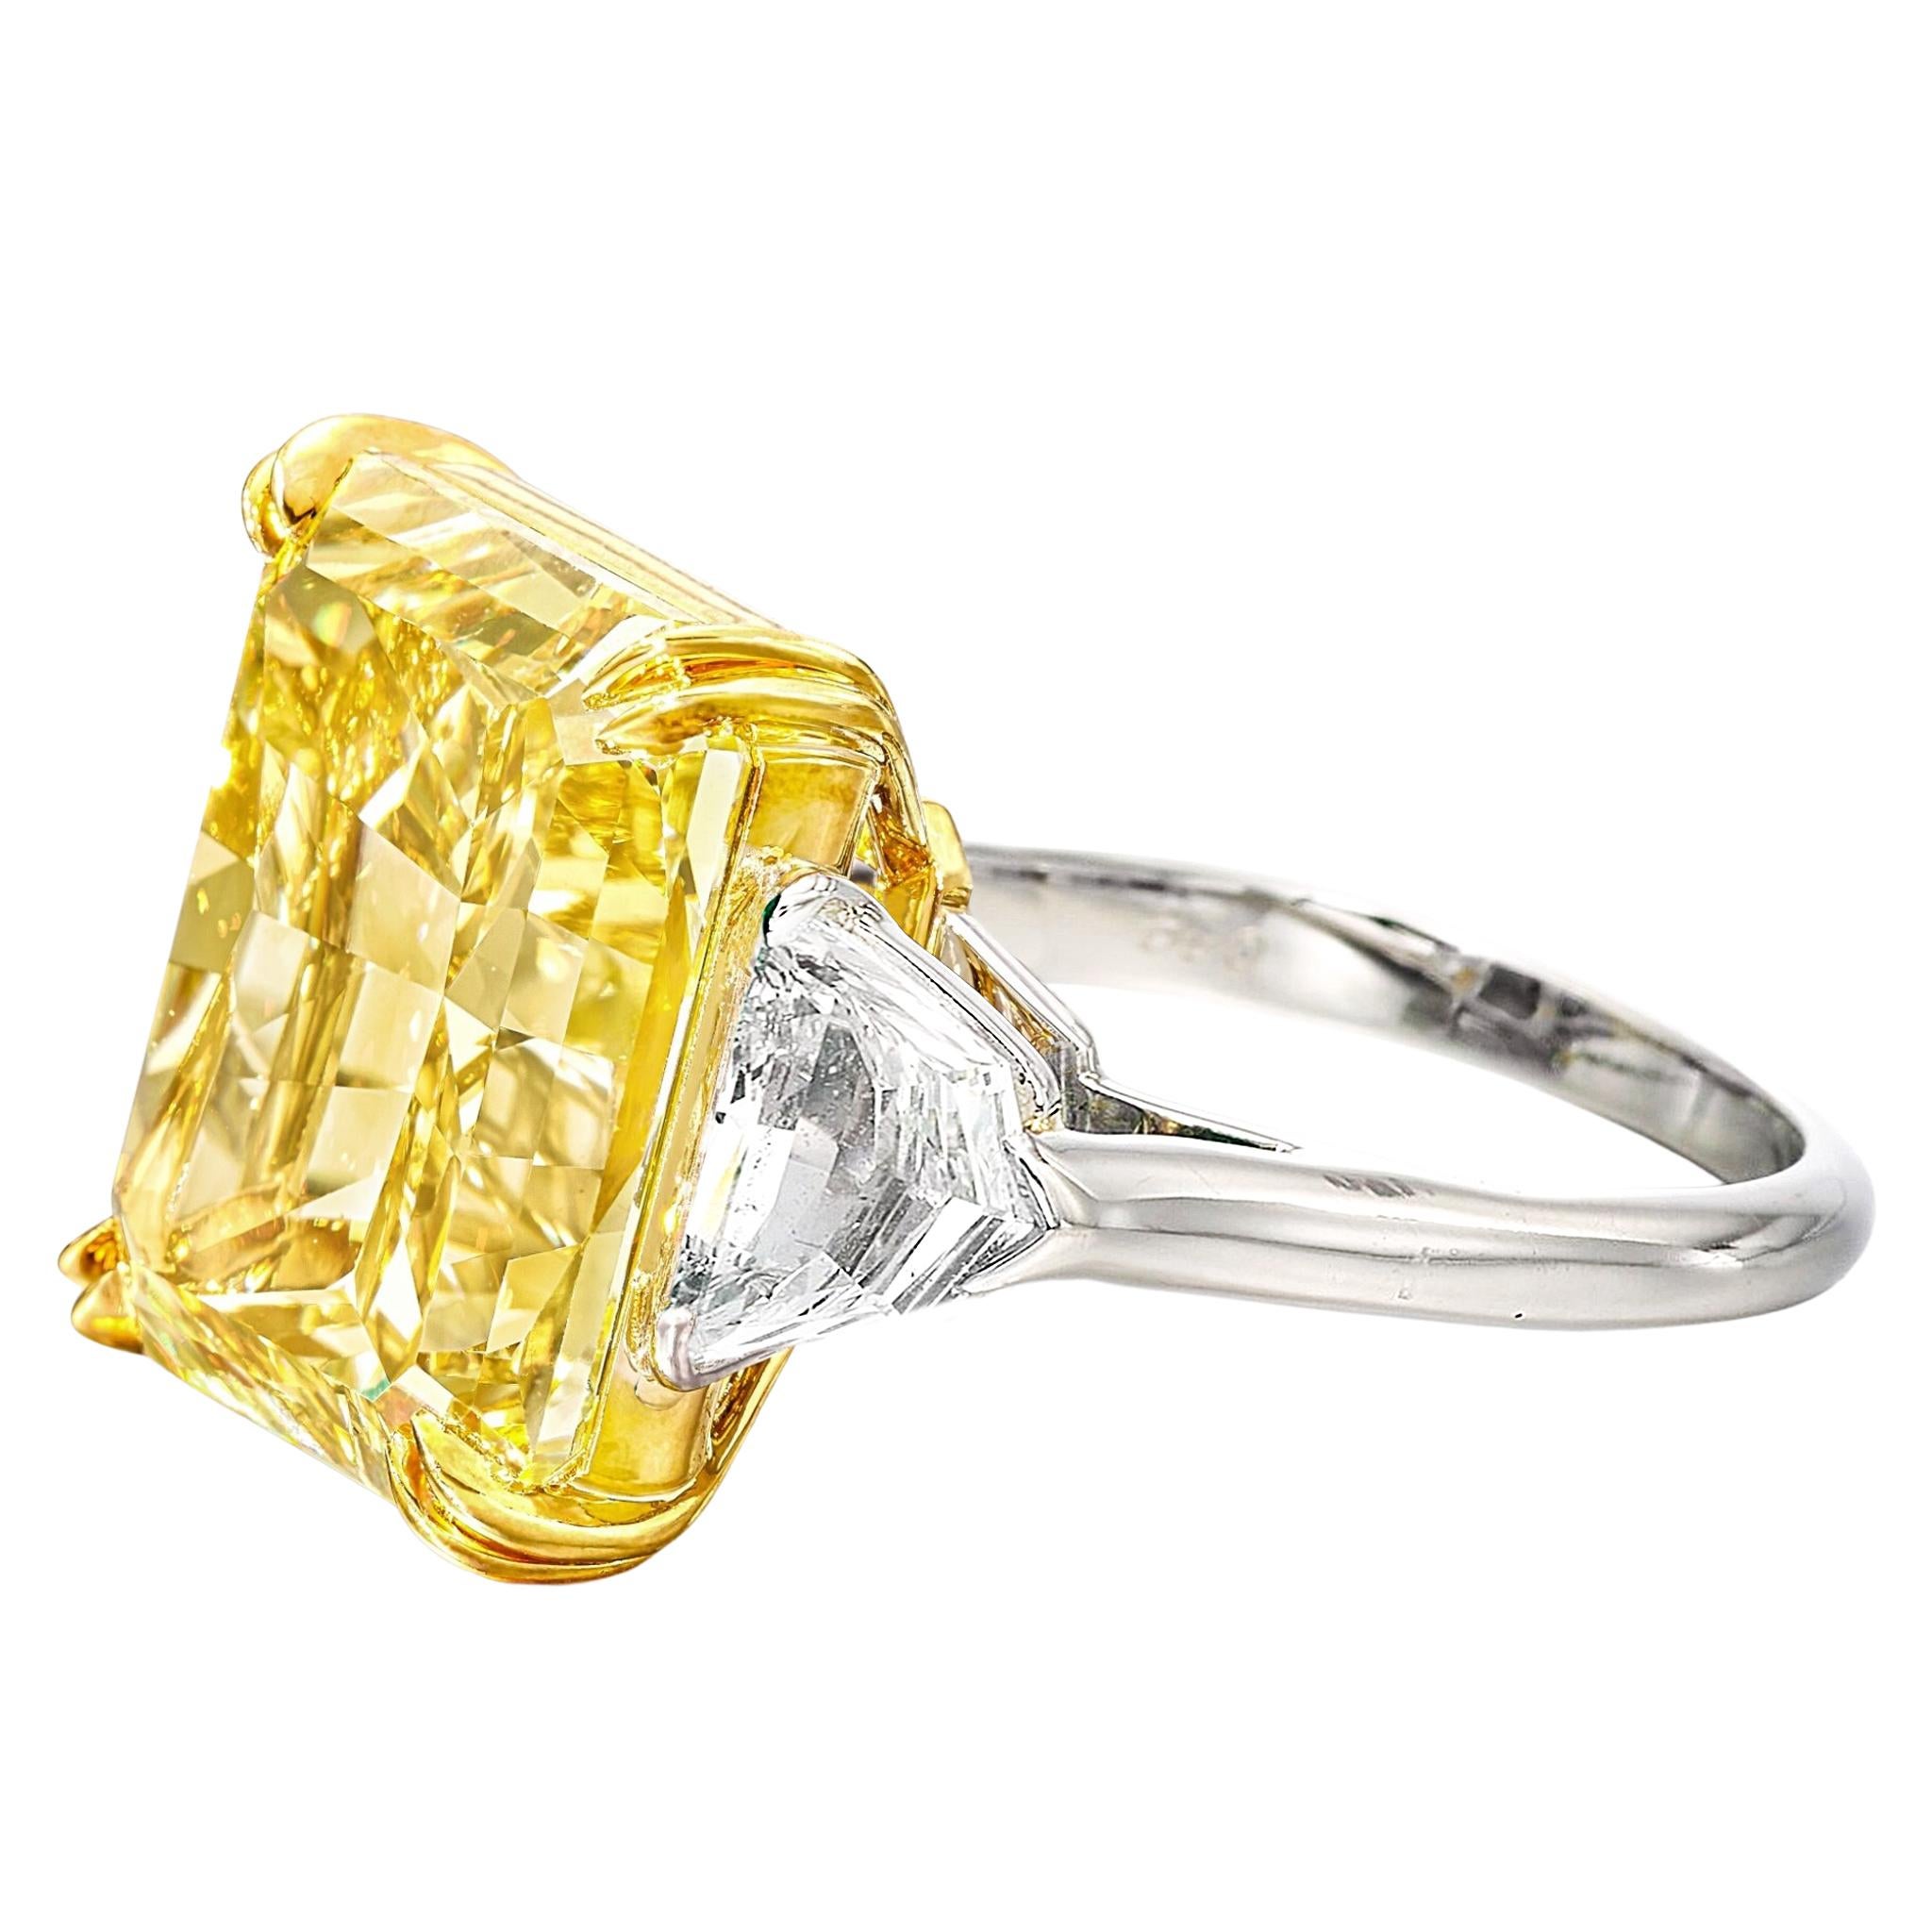 Modern Exceptional GIA Certified 10.80 Carat Fancy Yellow Diamond Ring For Sale